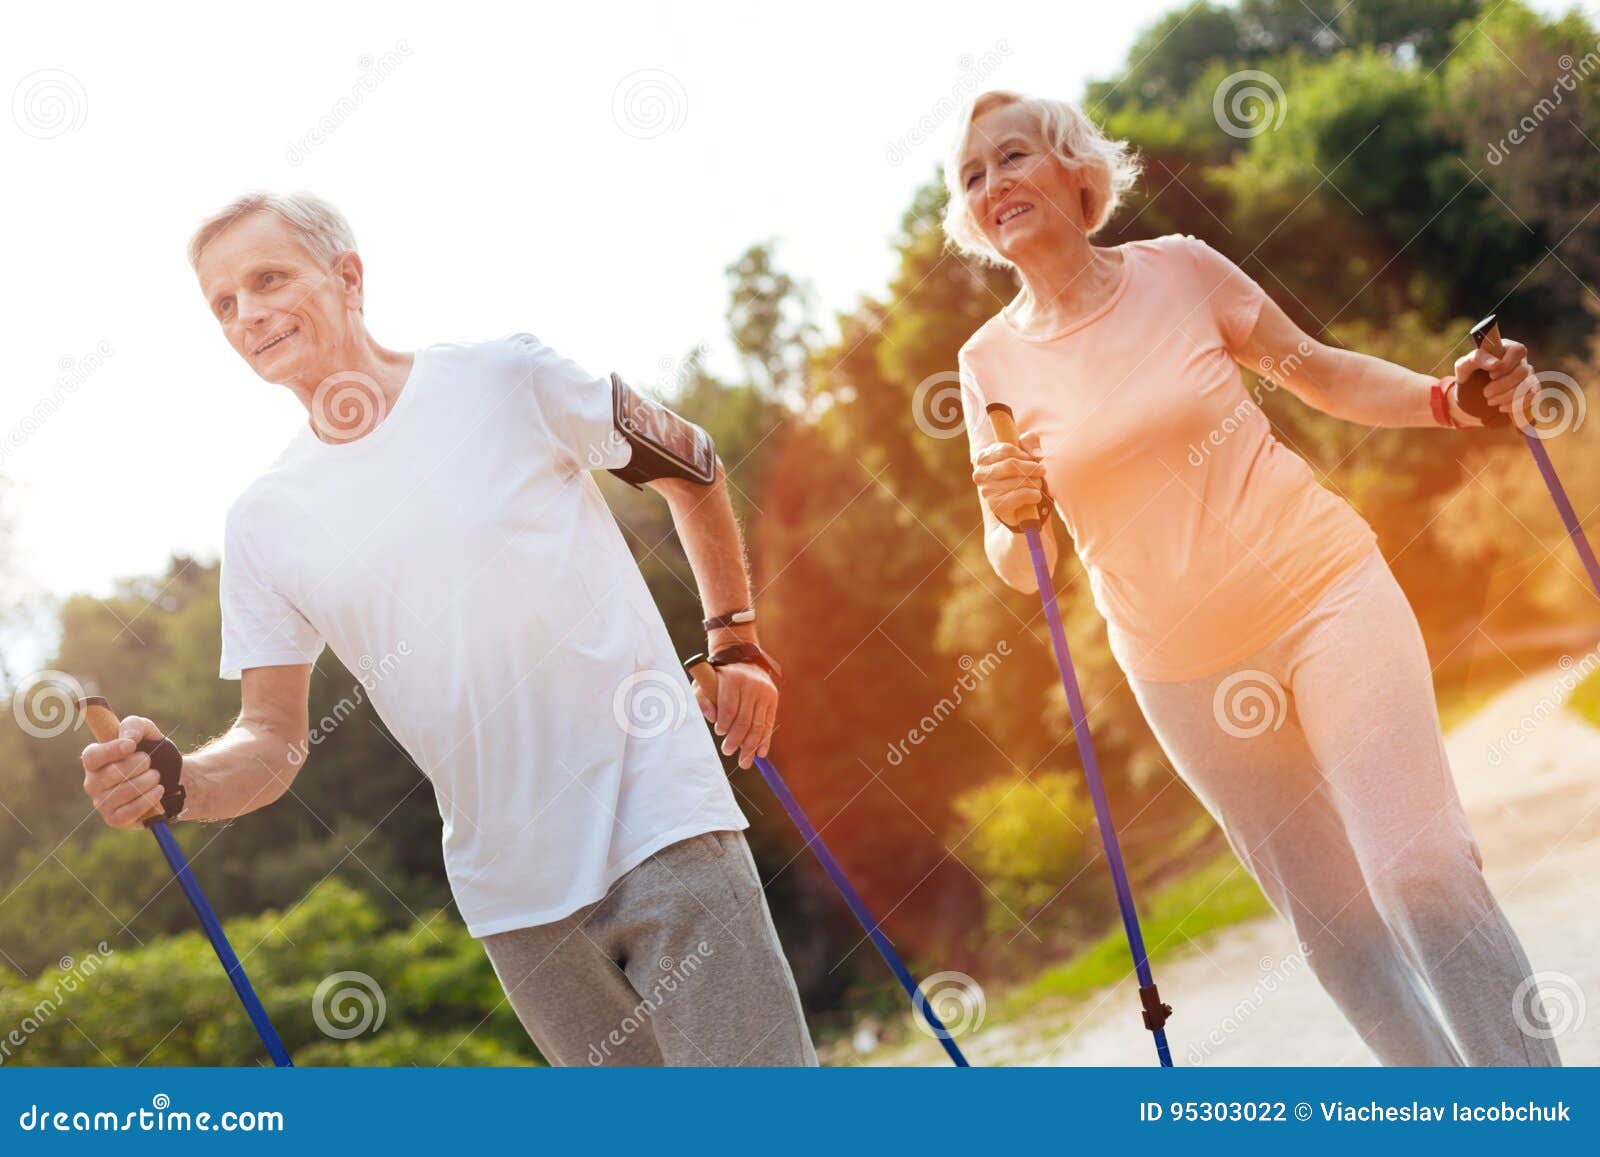 delighted elderly couple practicing nordic walking